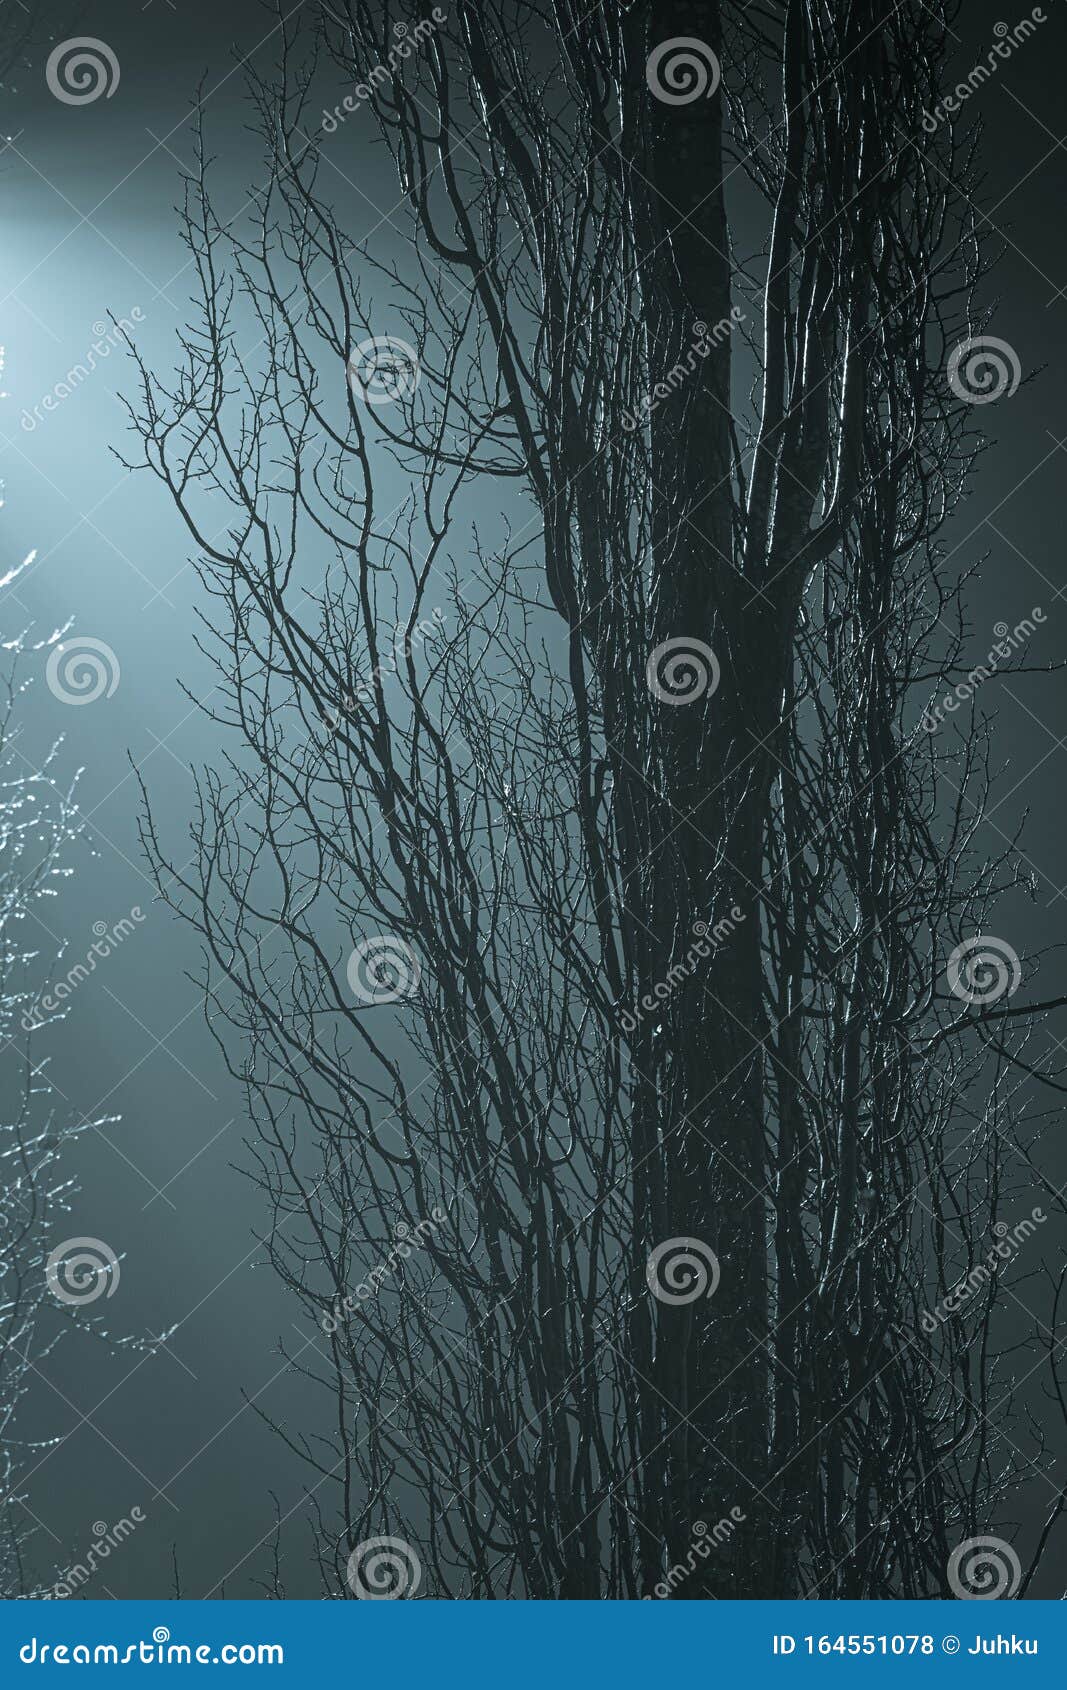 Tree Branches at Foggy Night Lit by Streetlamp Stock Photo - Image of